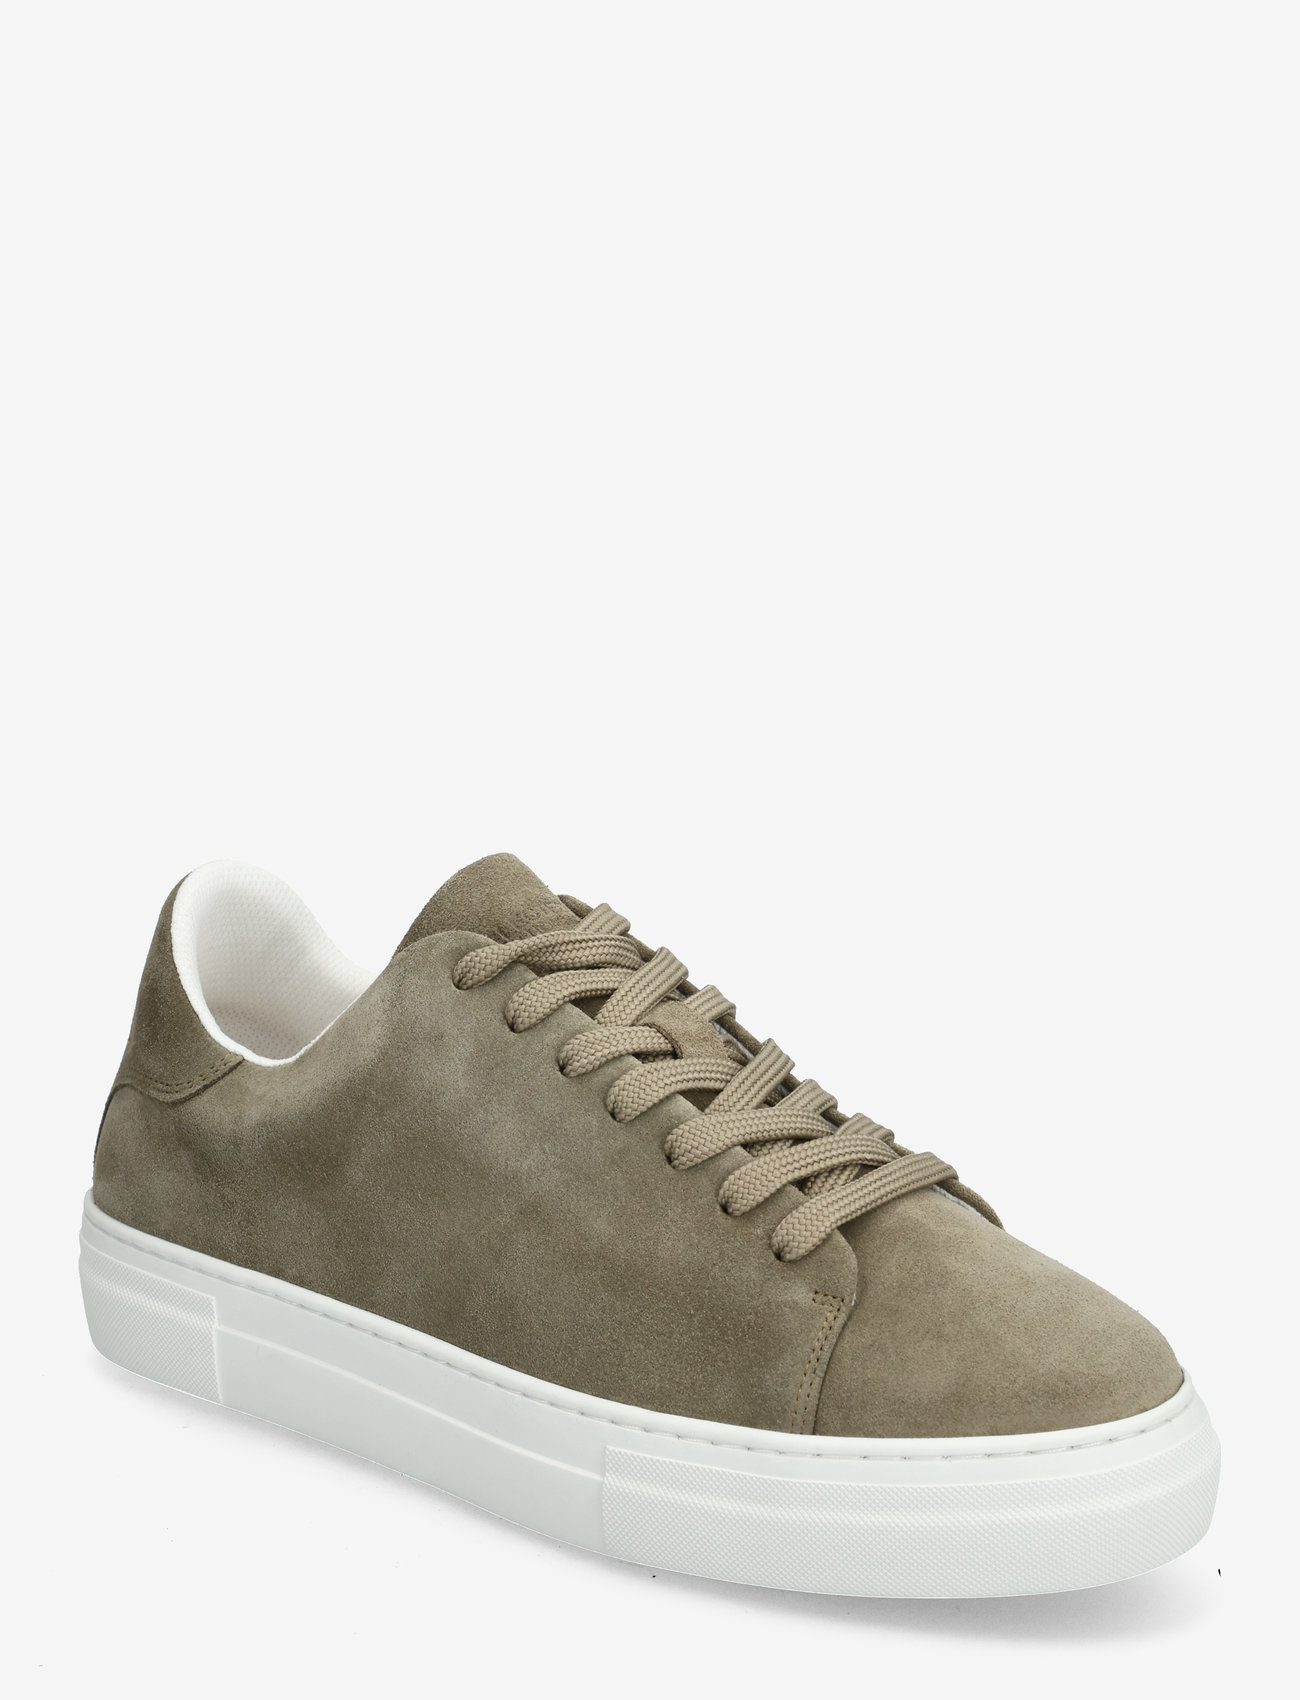 Selected Homme - SLHDAVID CHUNKY CLEAN SUEDE TRAINER B - niedriger schnitt - grape leaf - 0